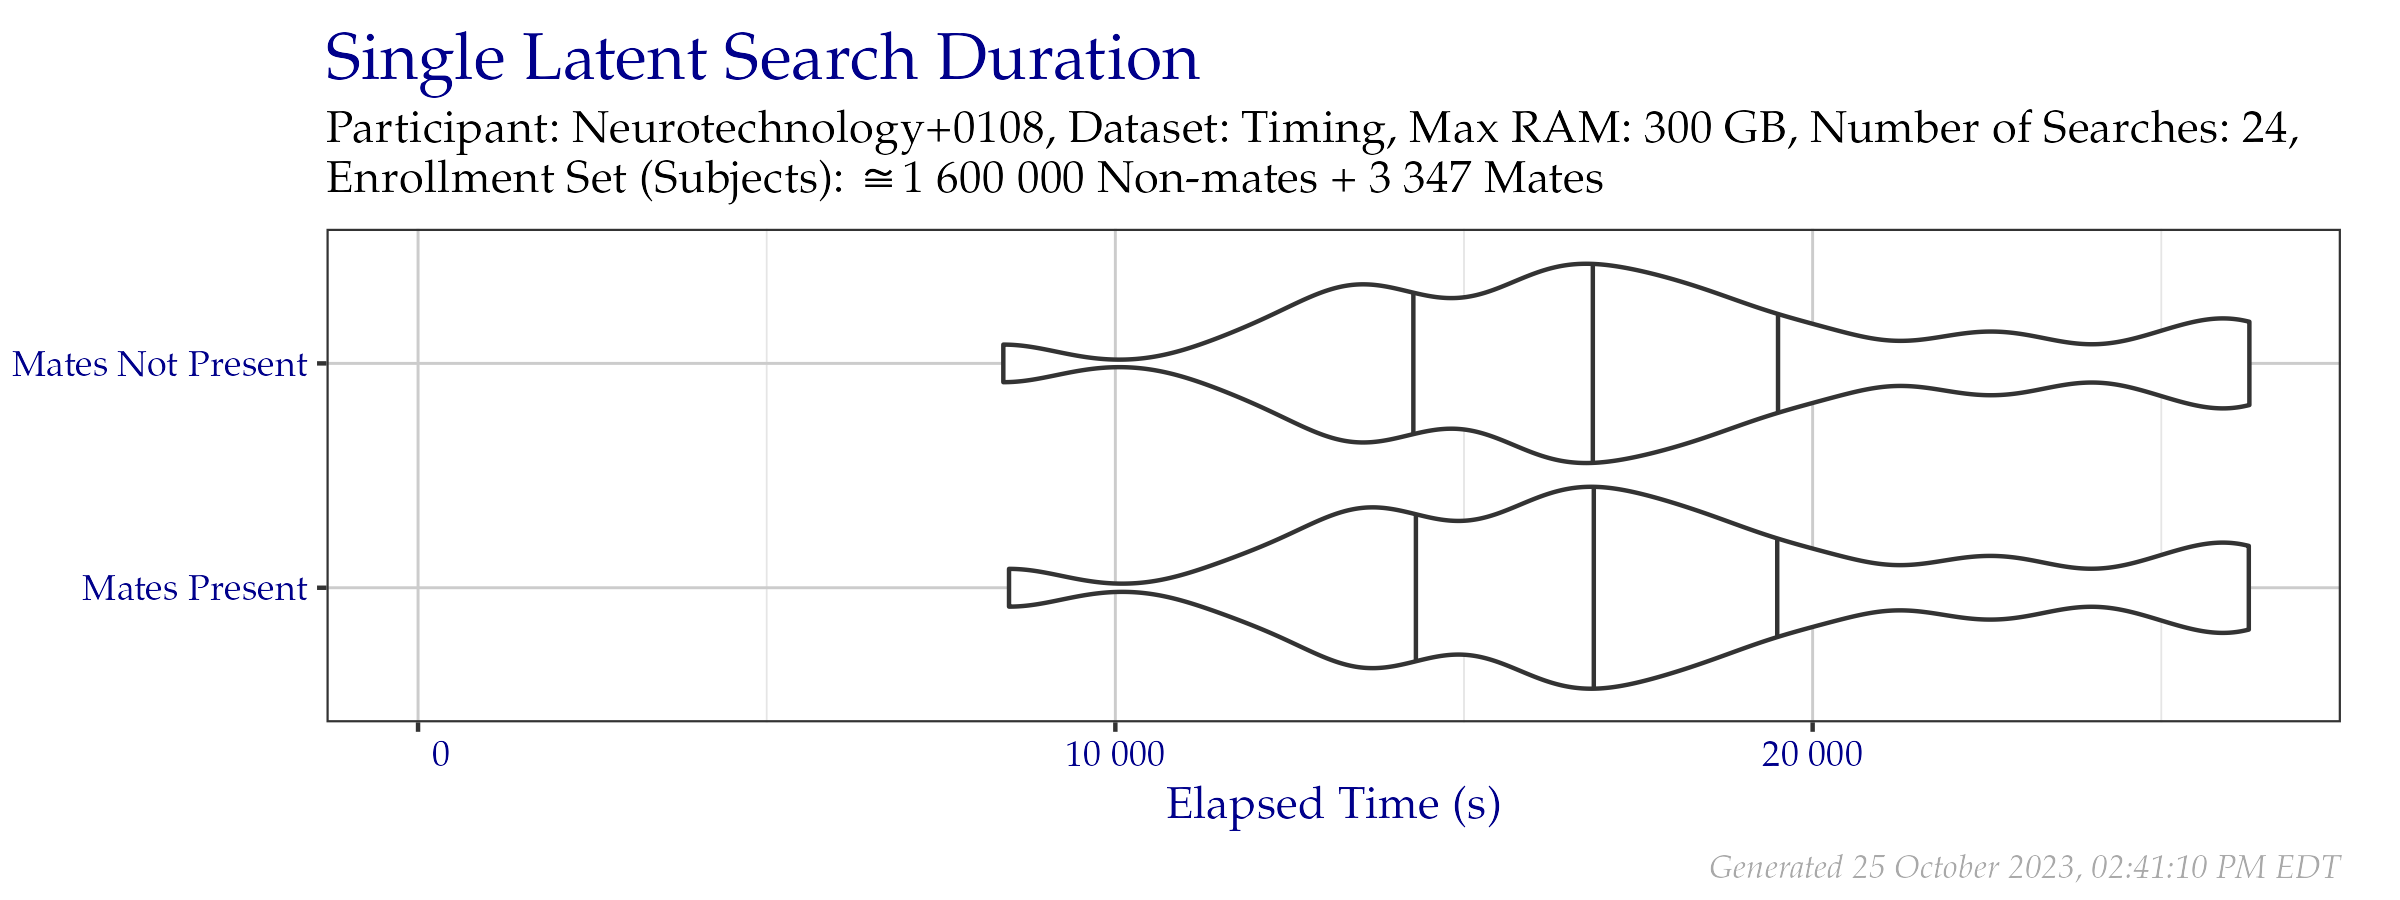 Violin plot of search time durations of the search probe set from the Timing Sample dataset. Vertical lines from left to right indicate the 25\%, 50\%, and 75\% quantiles respectively.